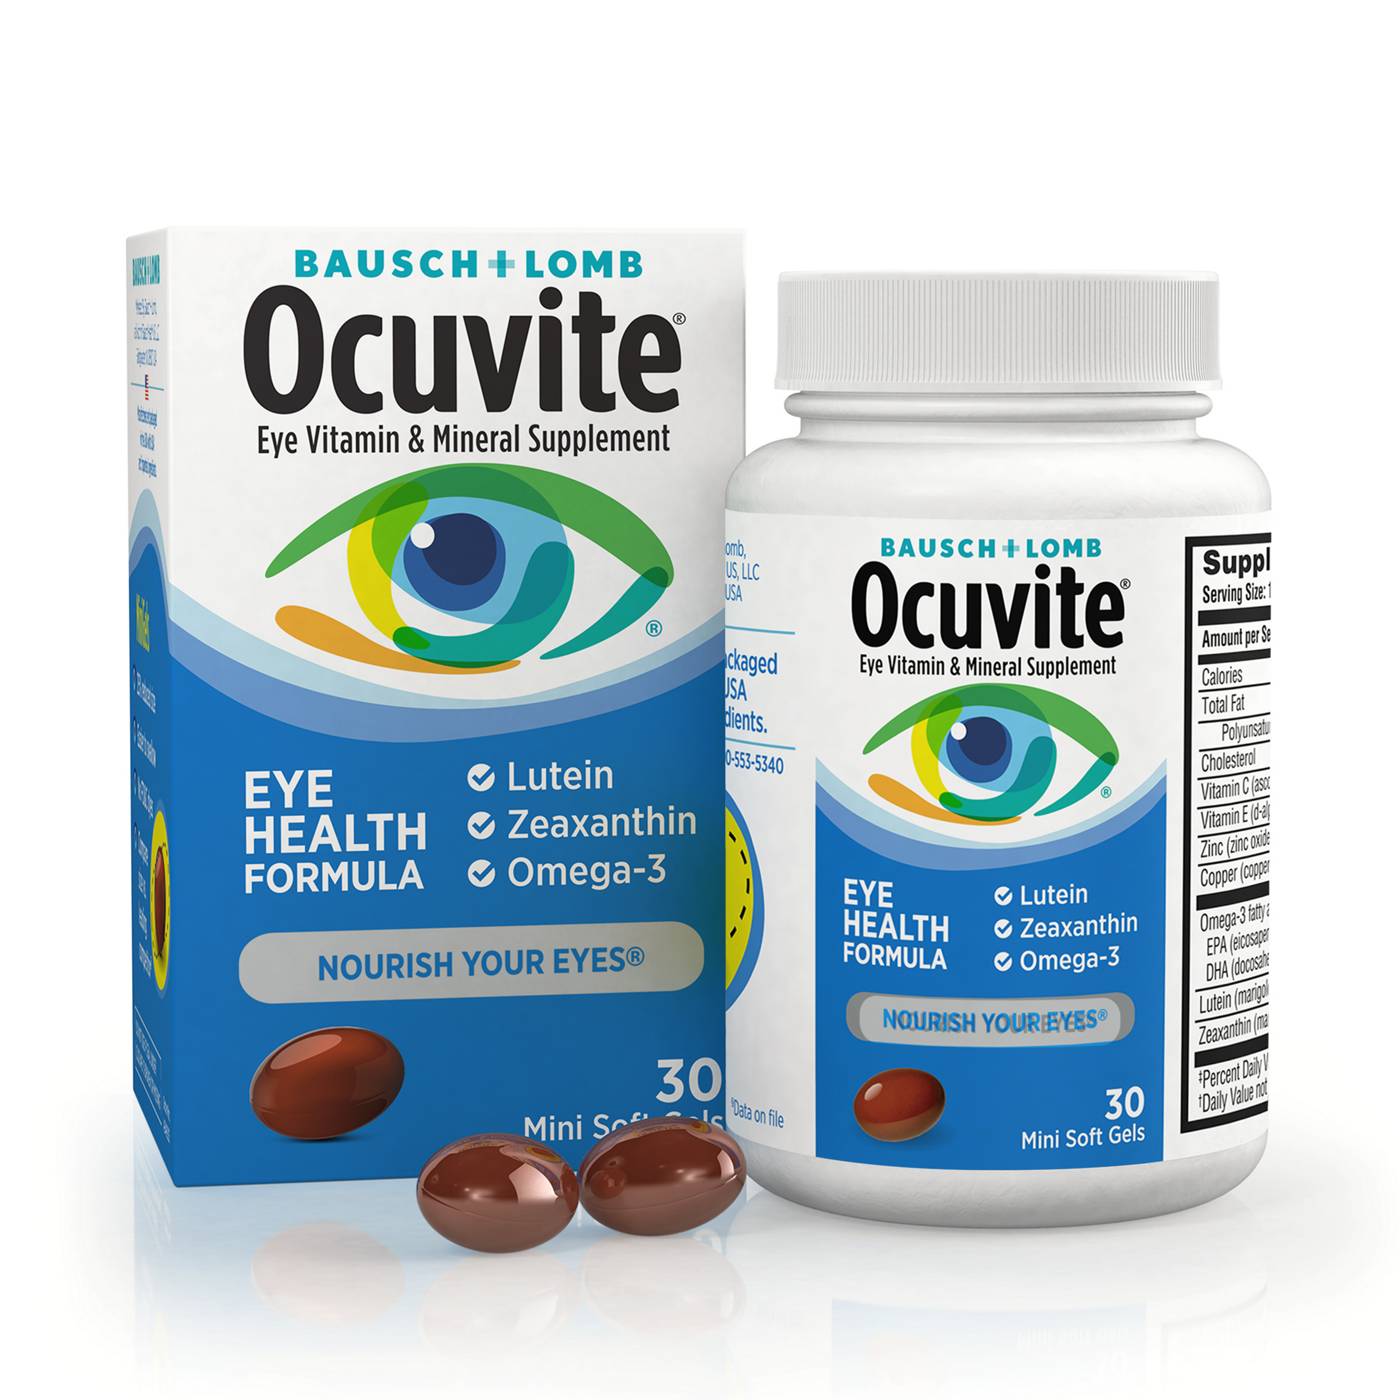 Bausch & Lomb Ocuvite Eye Vitamin and Mineral Supplement Eye Health Formula Softgels; image 4 of 6